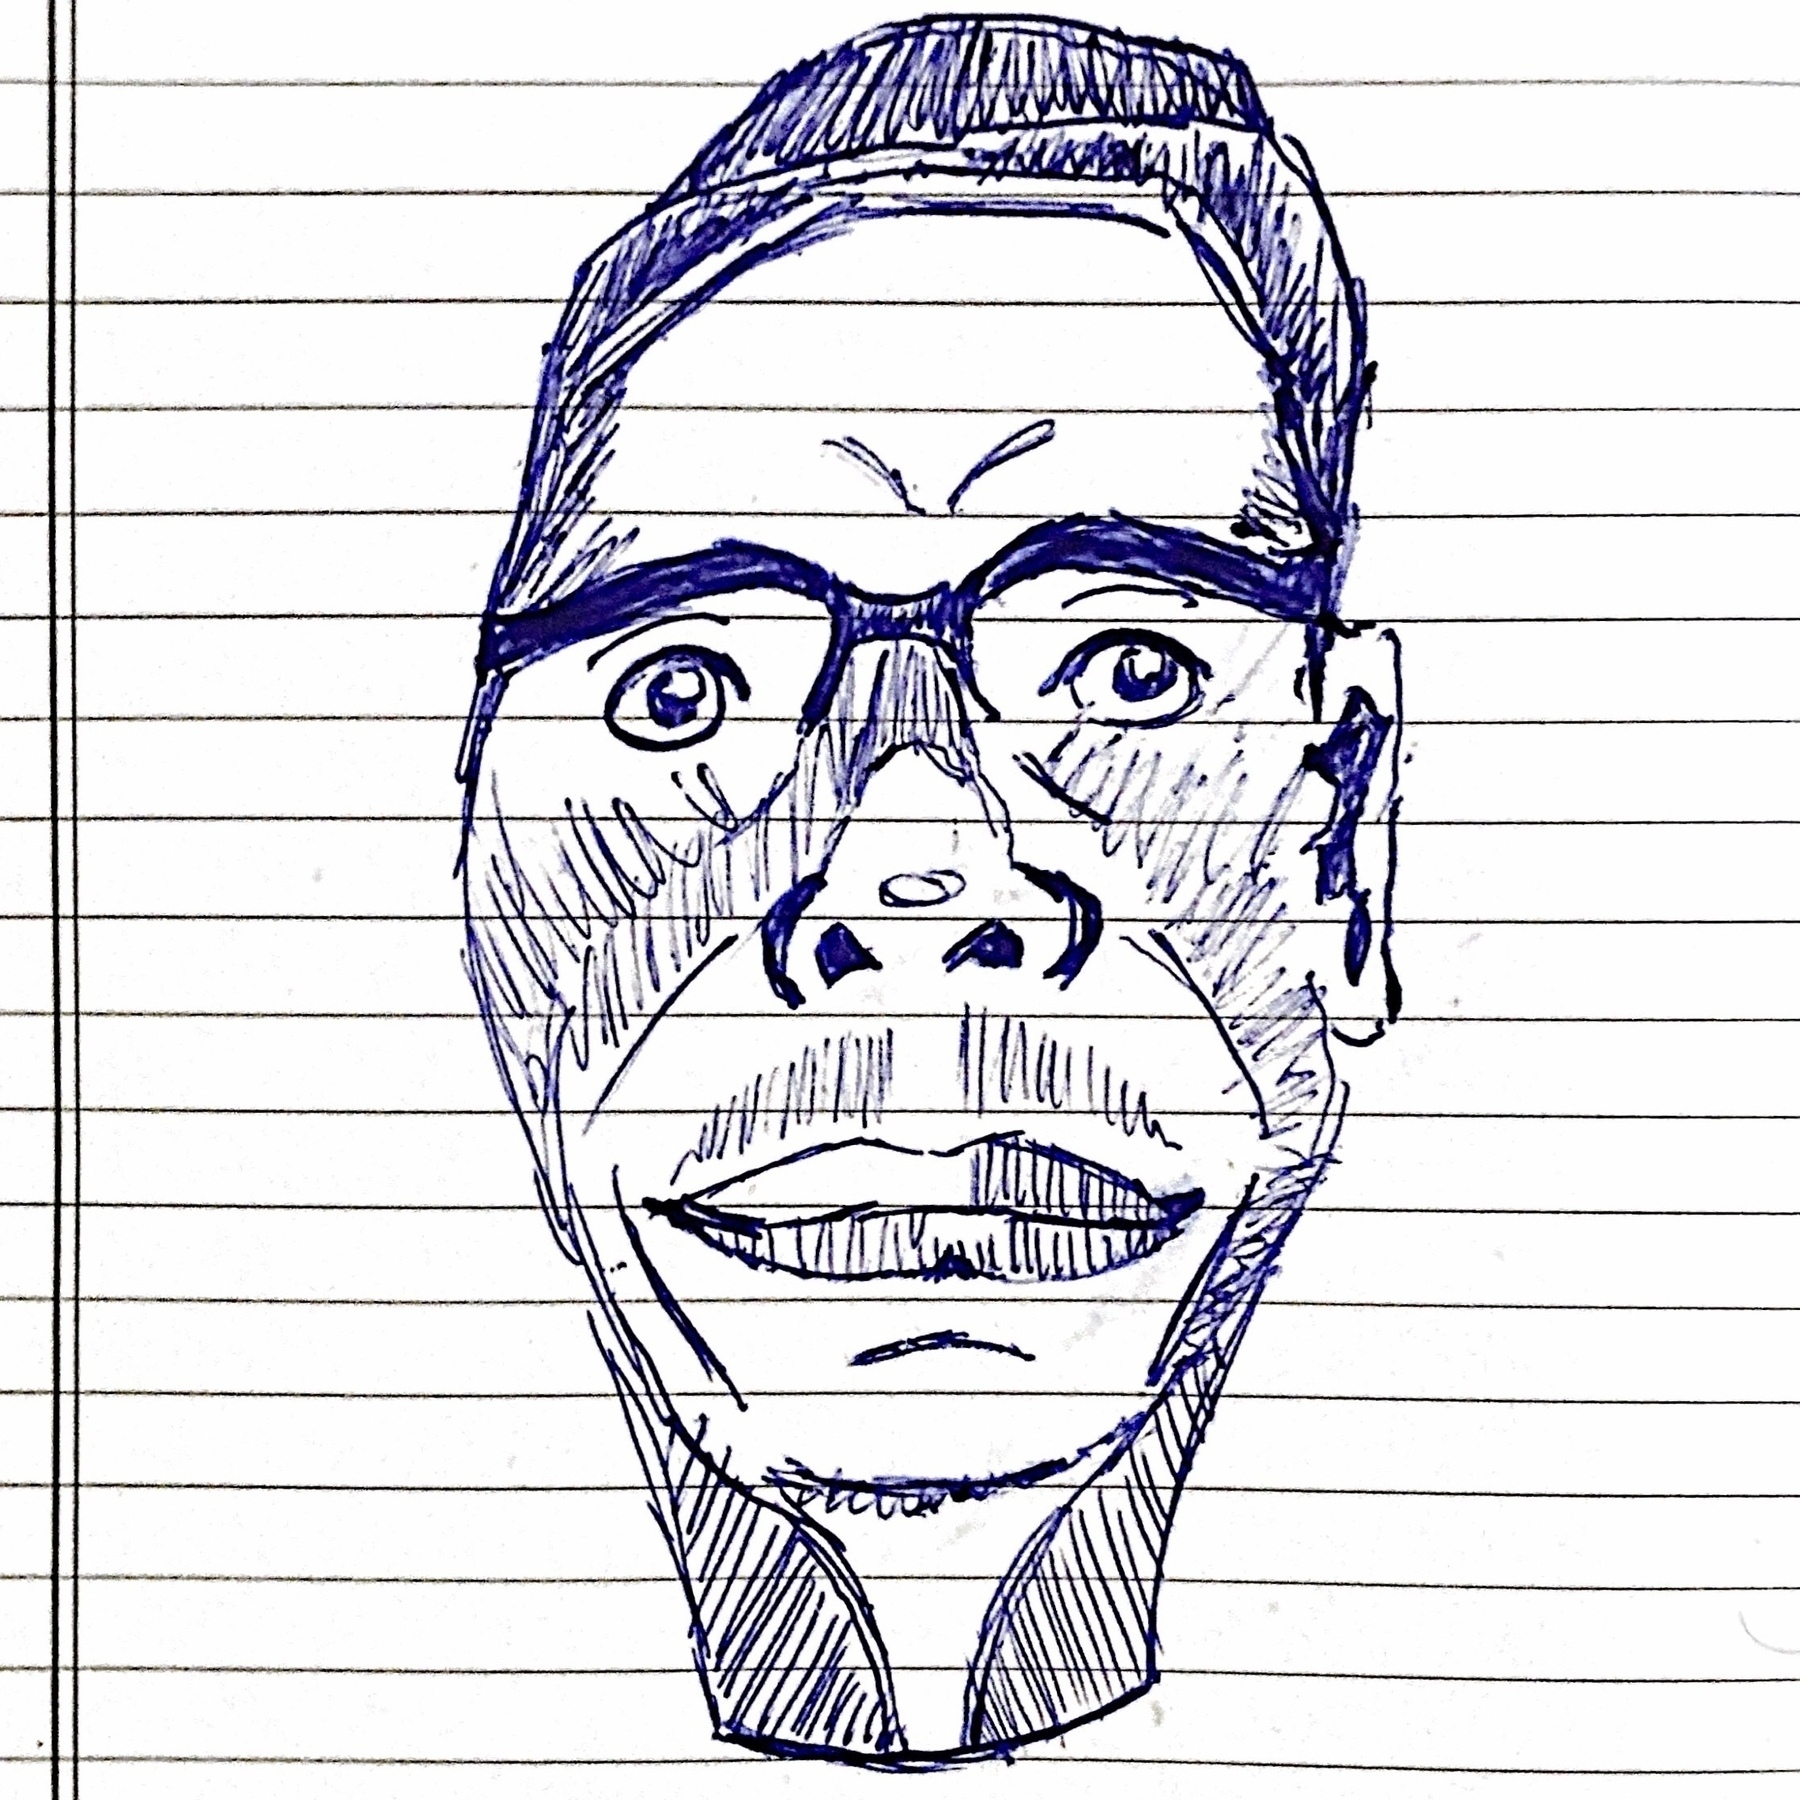 ballpoint sketch of caricature of author’s face